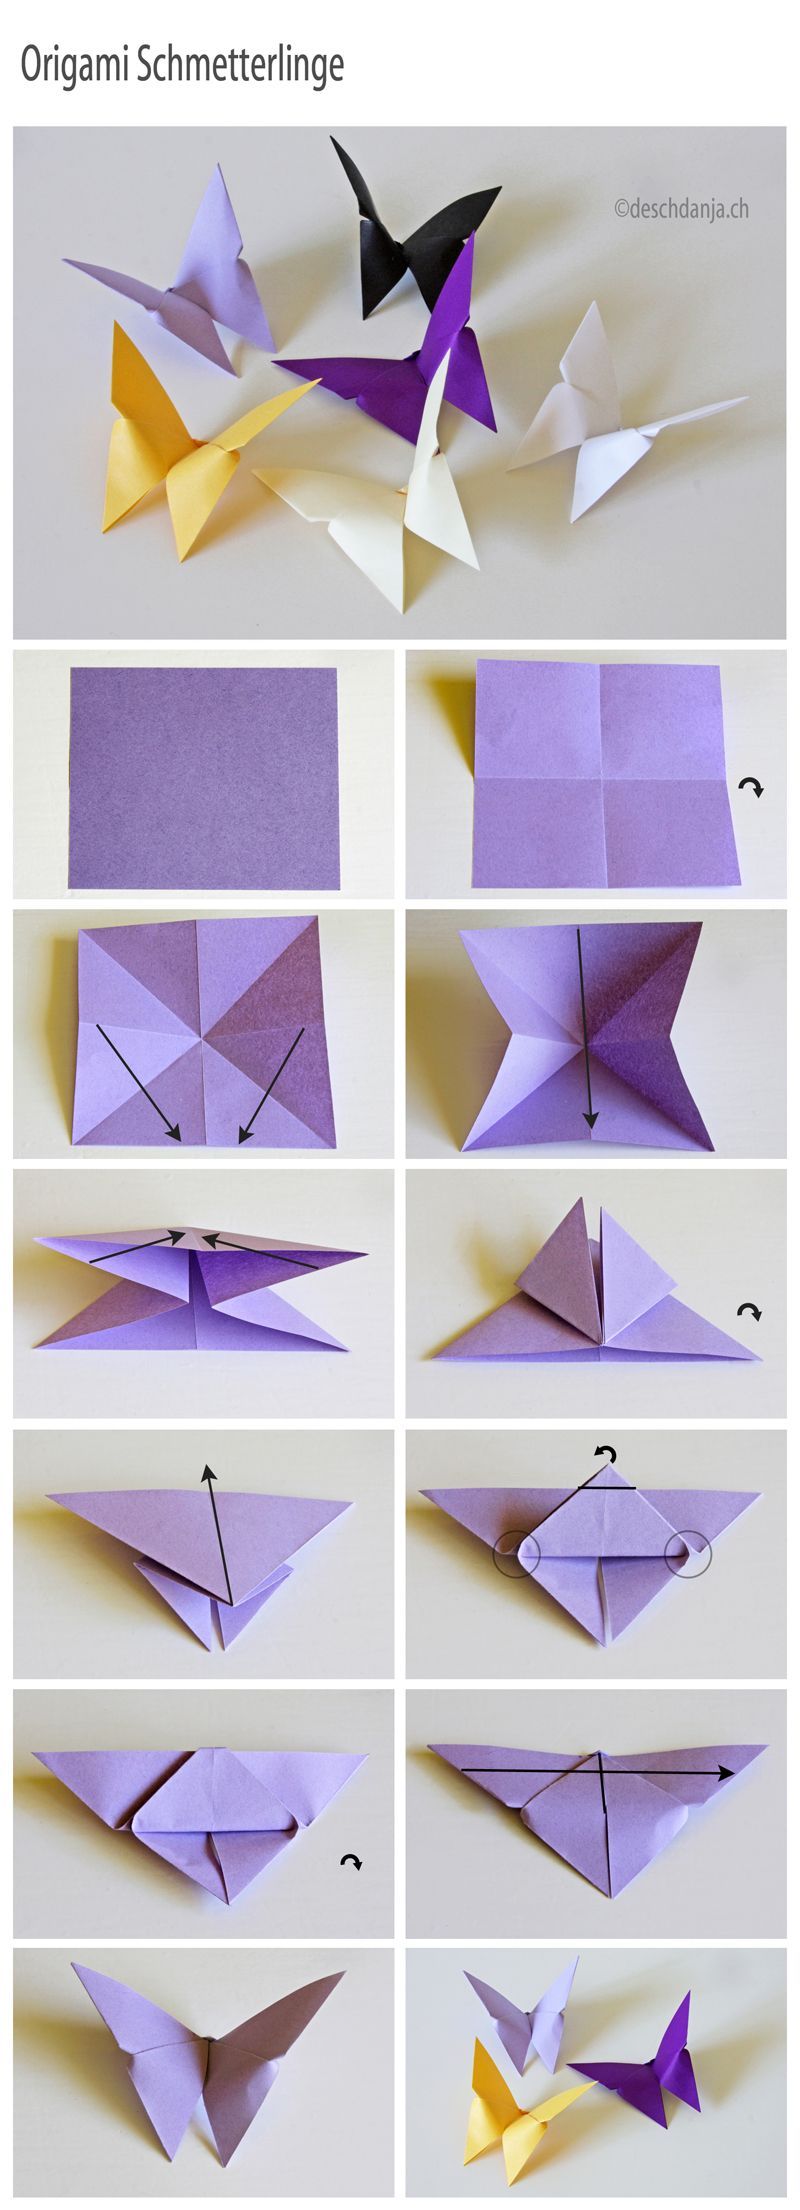 How to make Origami Butterflies These are lovely butterflies. The site is in Ger